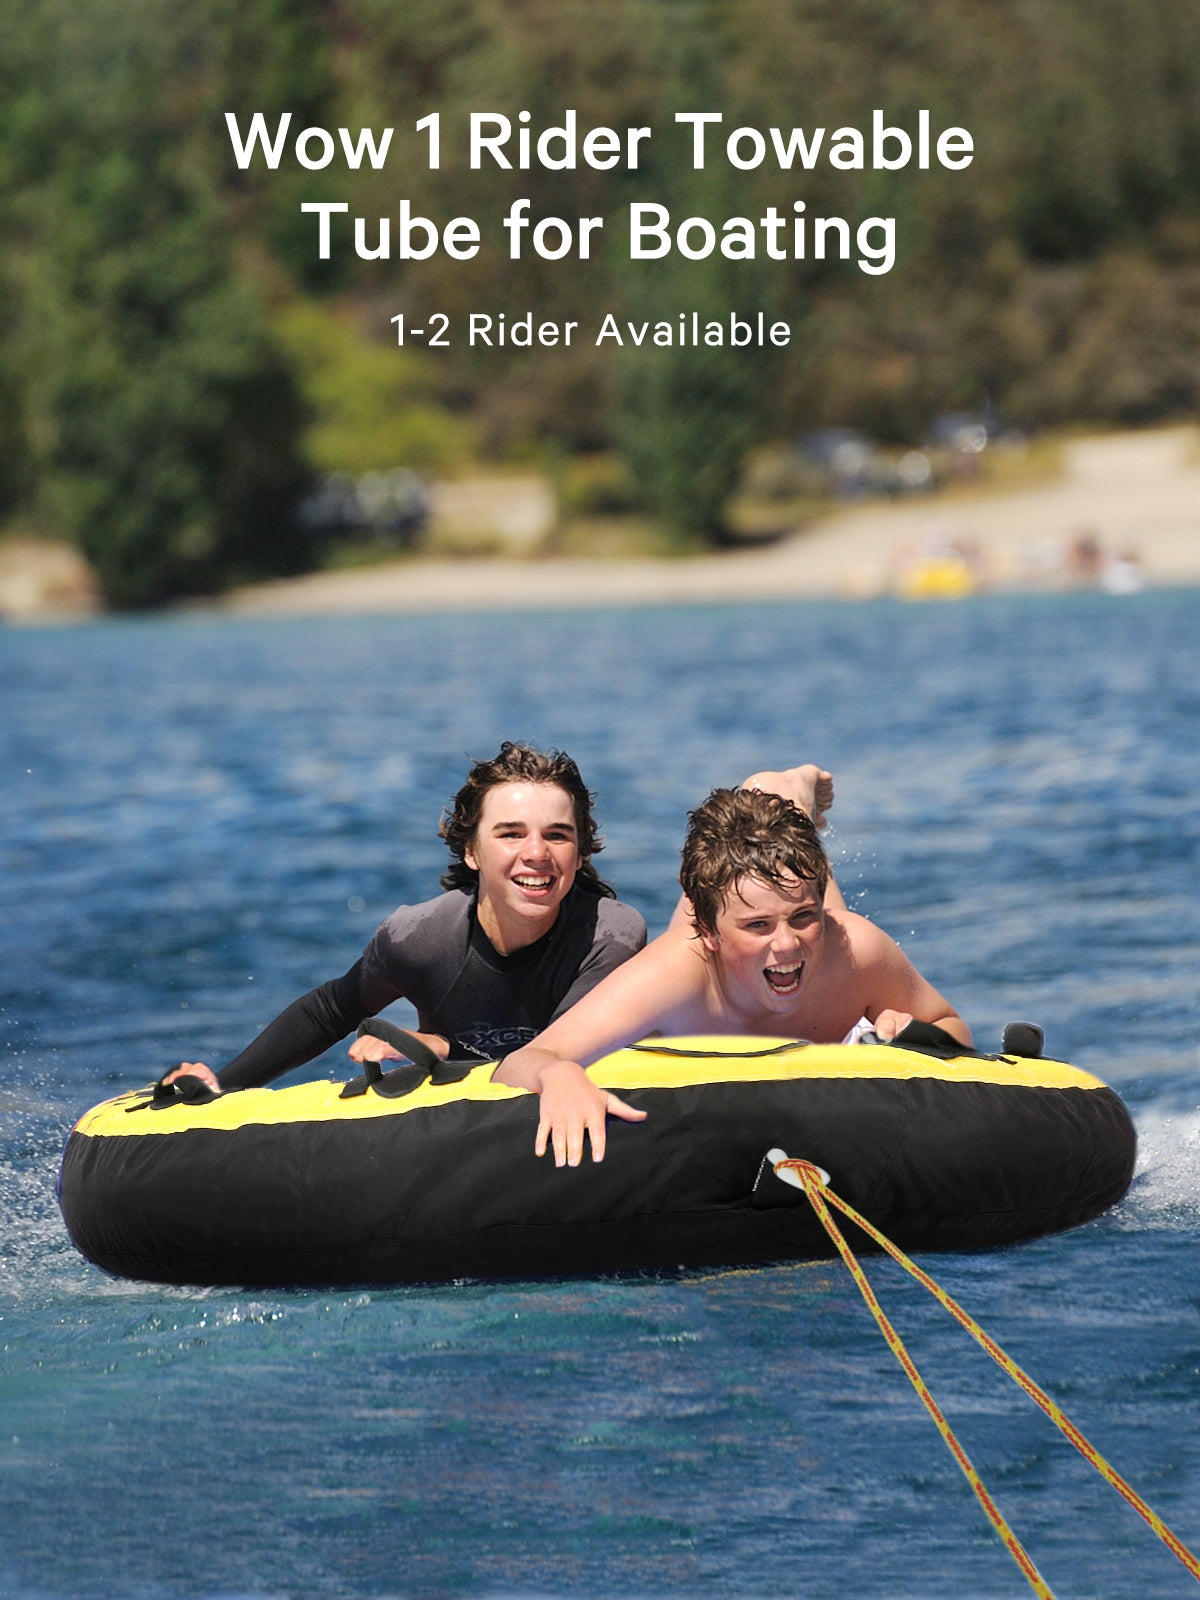 Load image into Gallery viewer, Towable Tube for Boating Inflatable Towable Boat Tube with 1 or 2 Riders Options Quick Rope Connect Watersports for Women Men Kids Yellow
